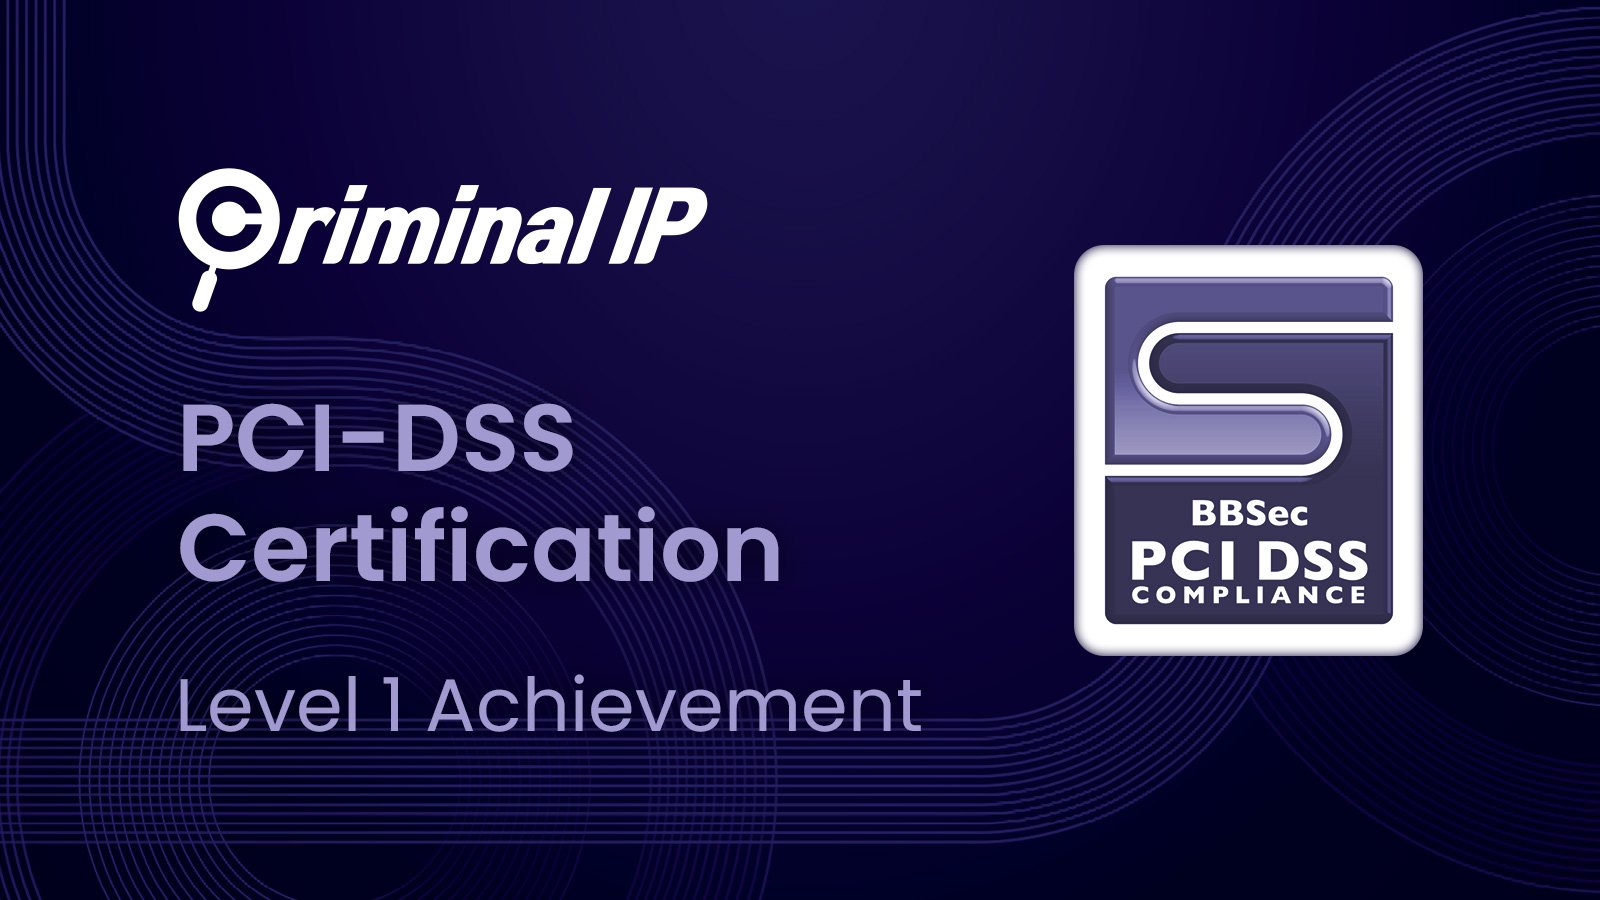 Criminal IP Elevates Payment Security with PCI DSS Level 1 Certification – Source: www.bleepingcomputer.com